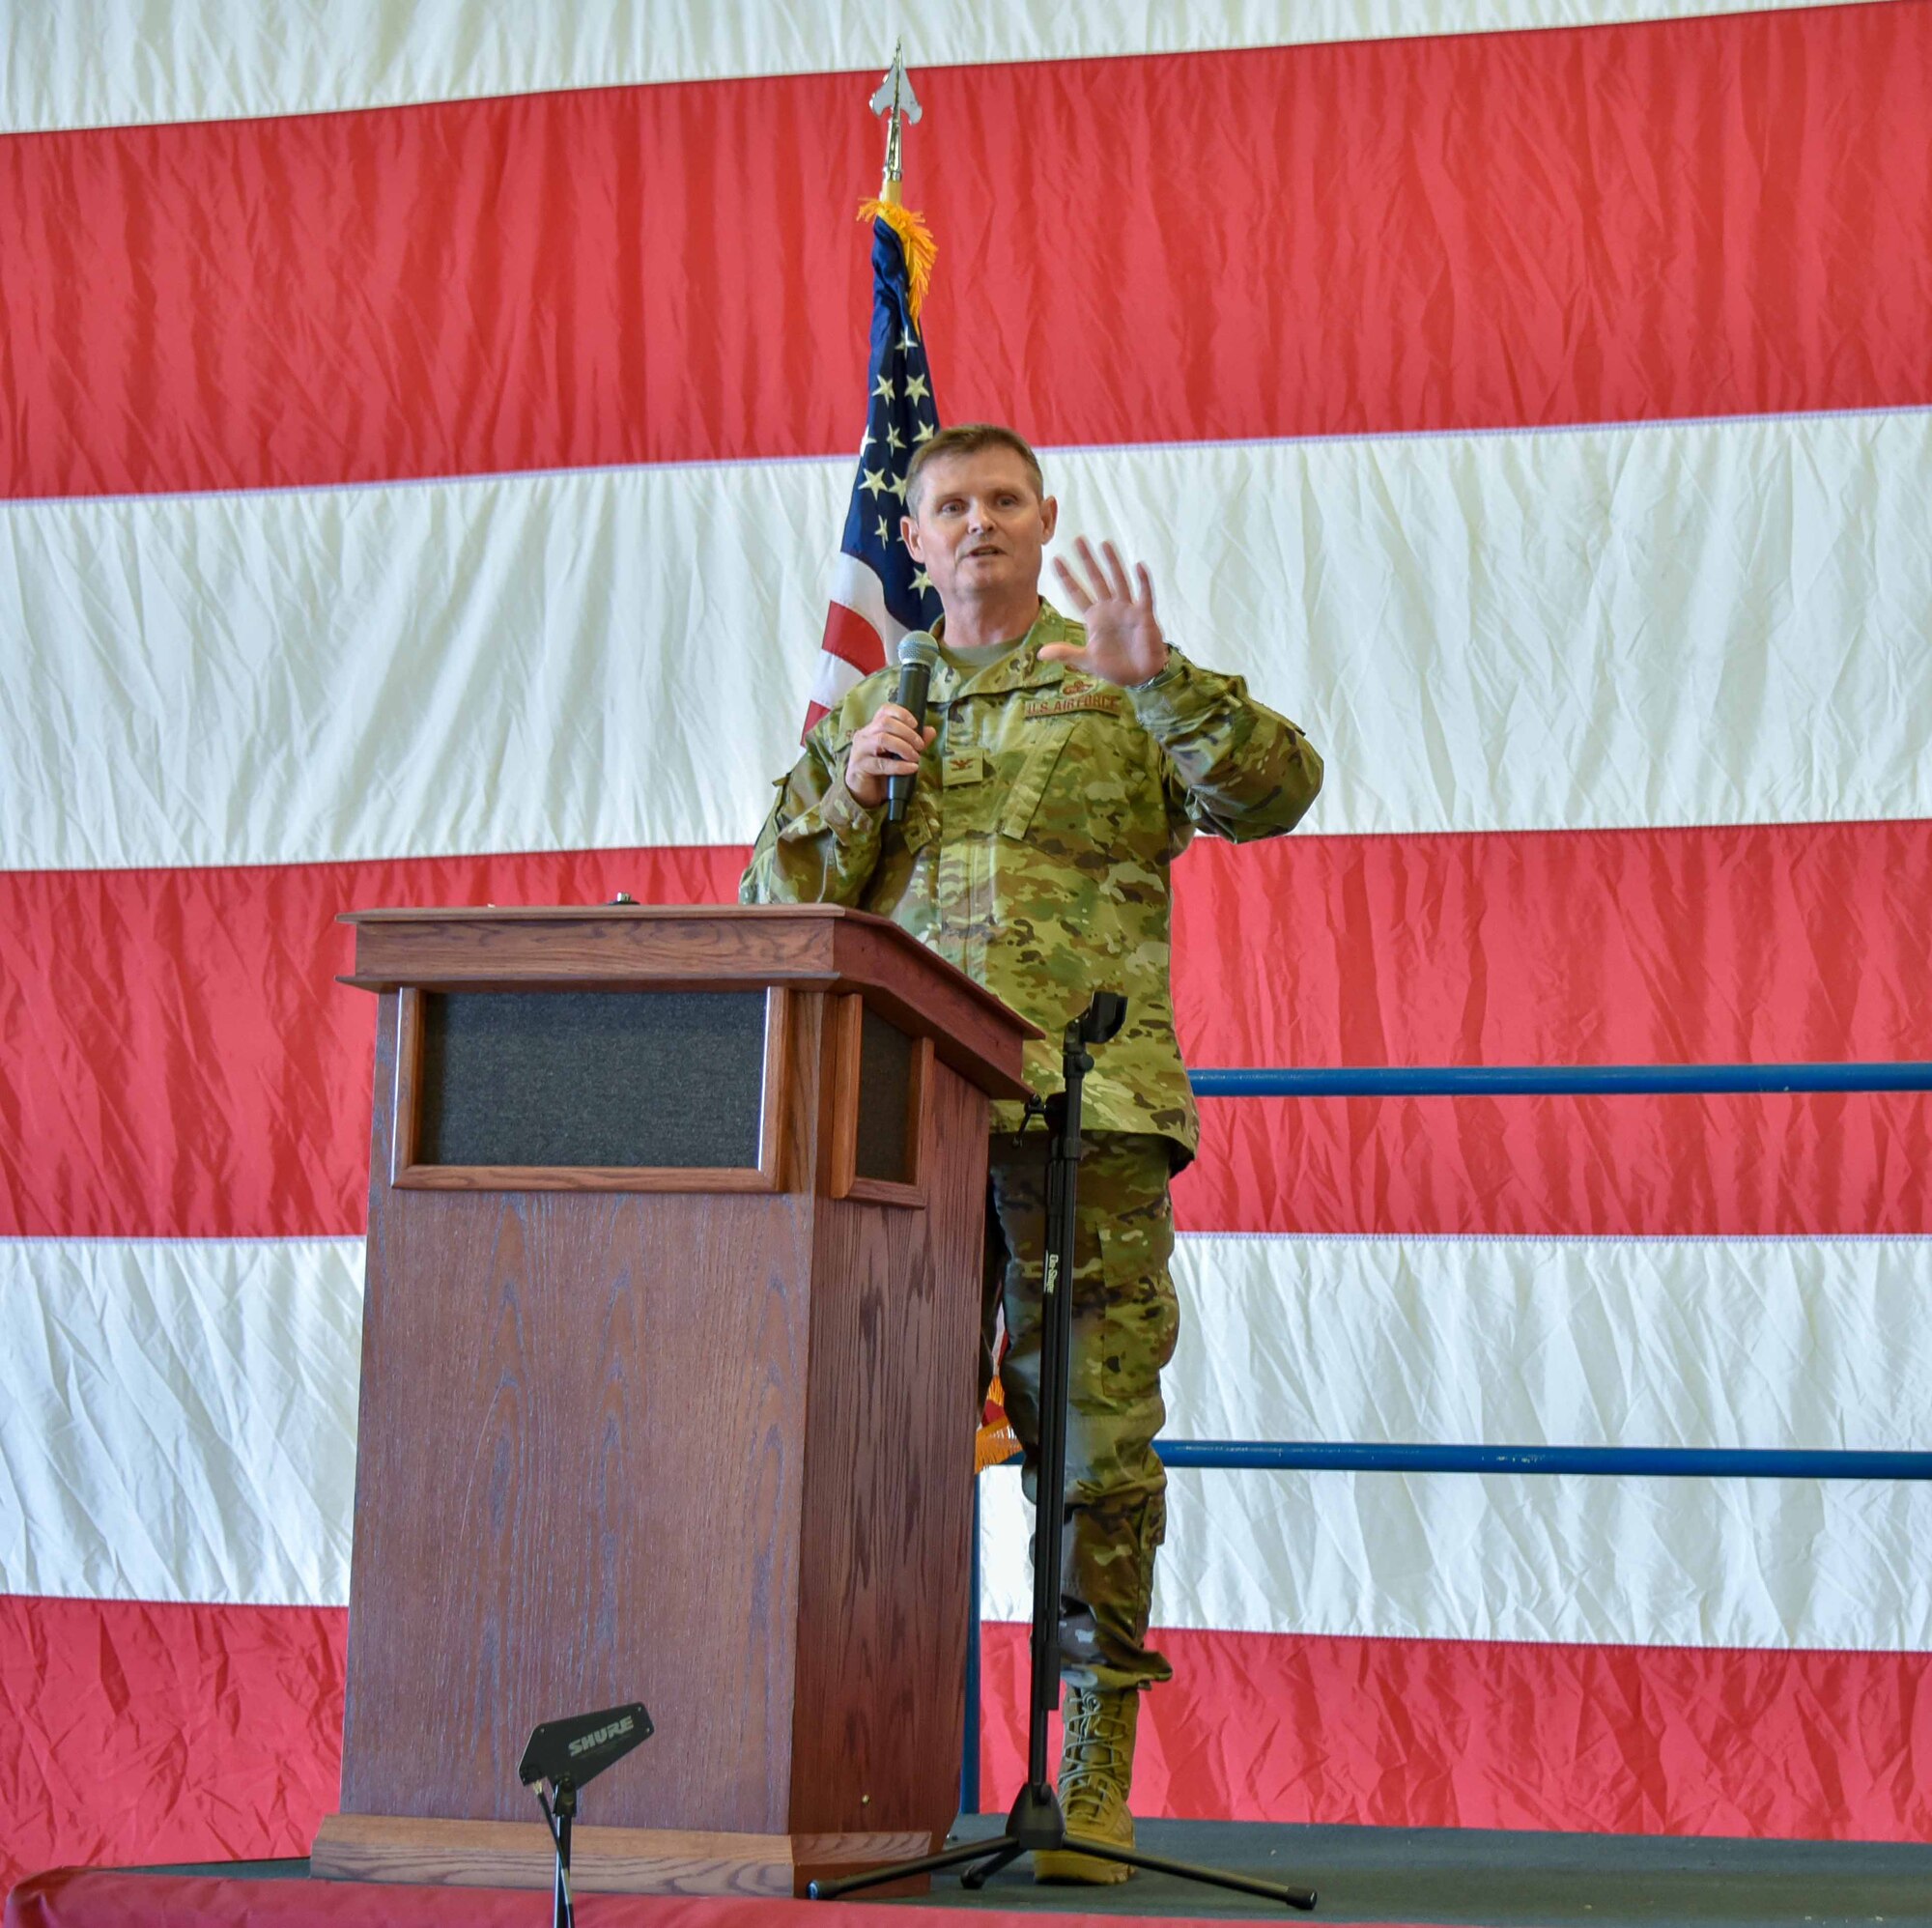 Col. L. Gregg Russell addresses his Airmen for the first time during  the 301st Mission Support Group assumption of command ceremony, Jan. 12, 2020, at U.S. Naval Air Station Joint Reserve Base Fort Worth, Texas. The 301 MSG provides in-garrison and agile combat support. (U.S. Air Force photo by Senior Airman Brittany Landy)